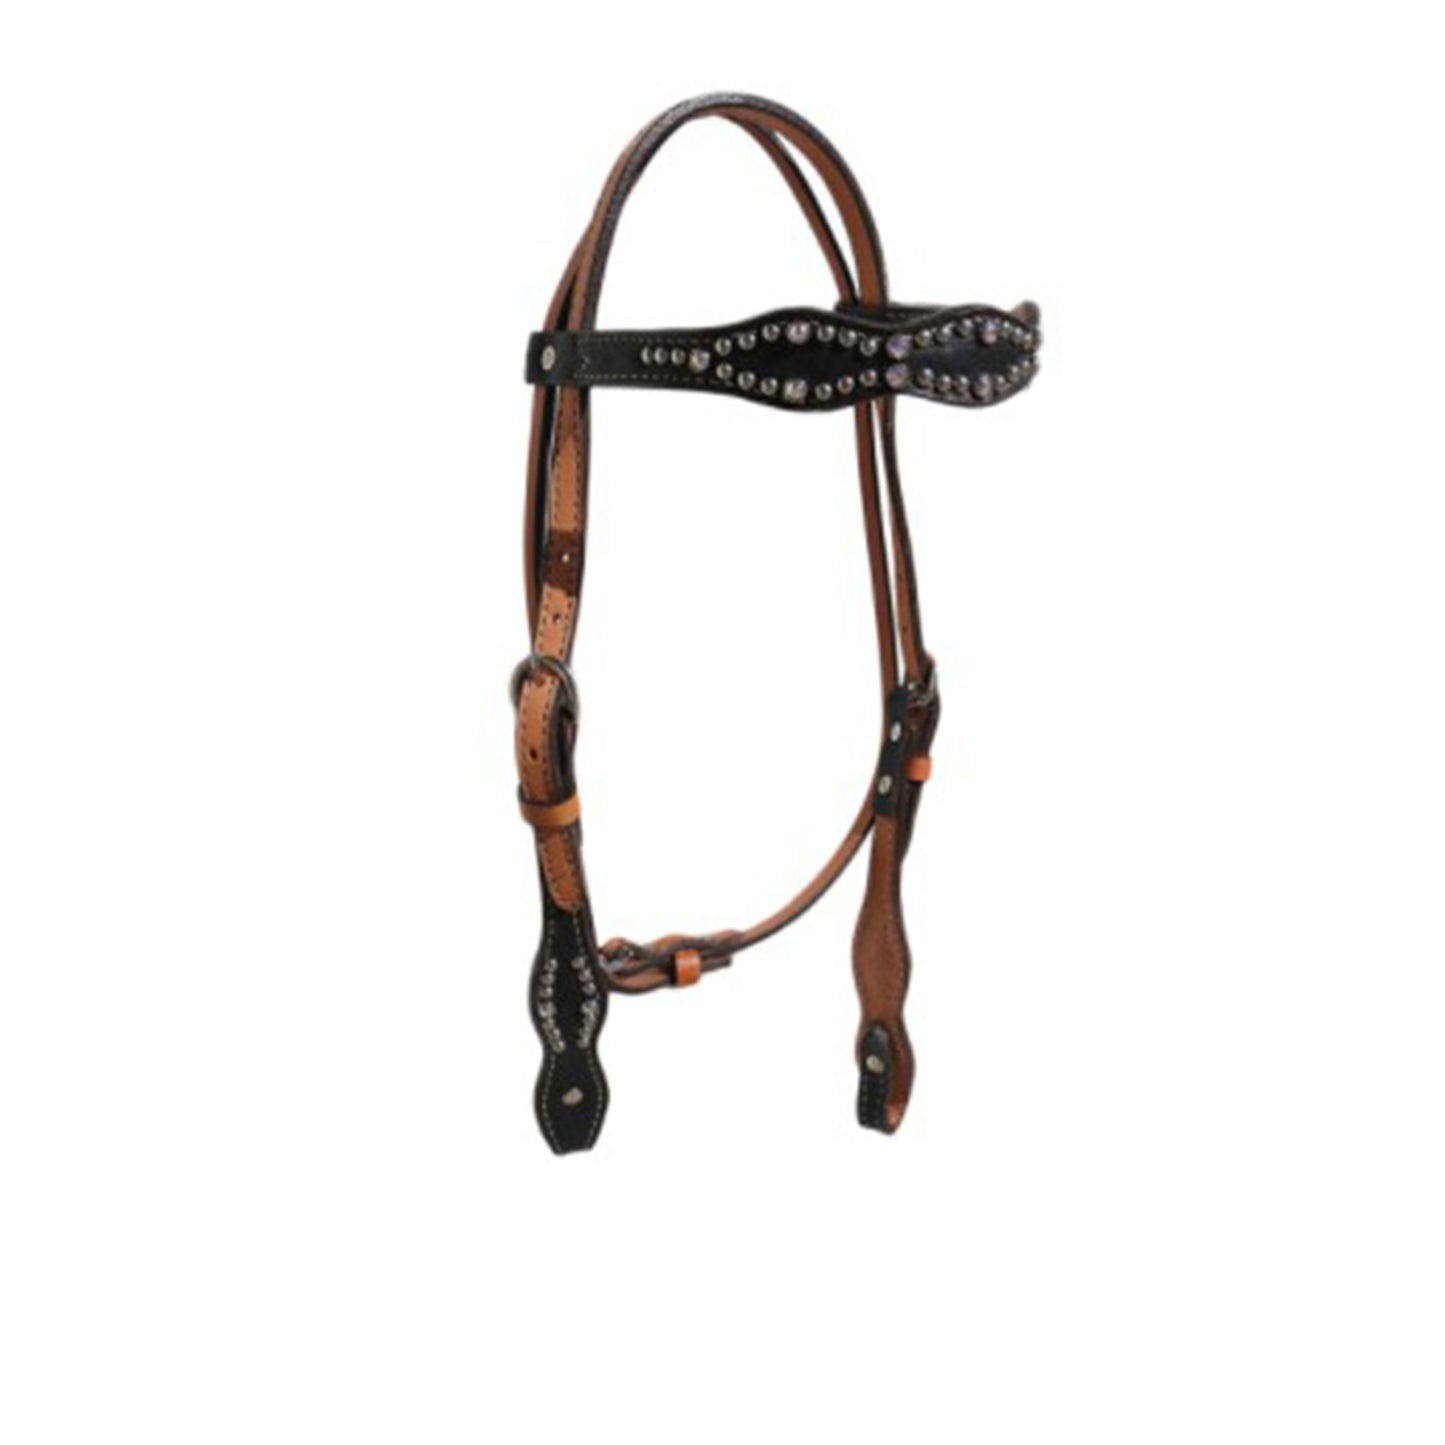  1/2" Scalloped browband headstall golden leather black gator overlay with swavorski crystals and SS spots.